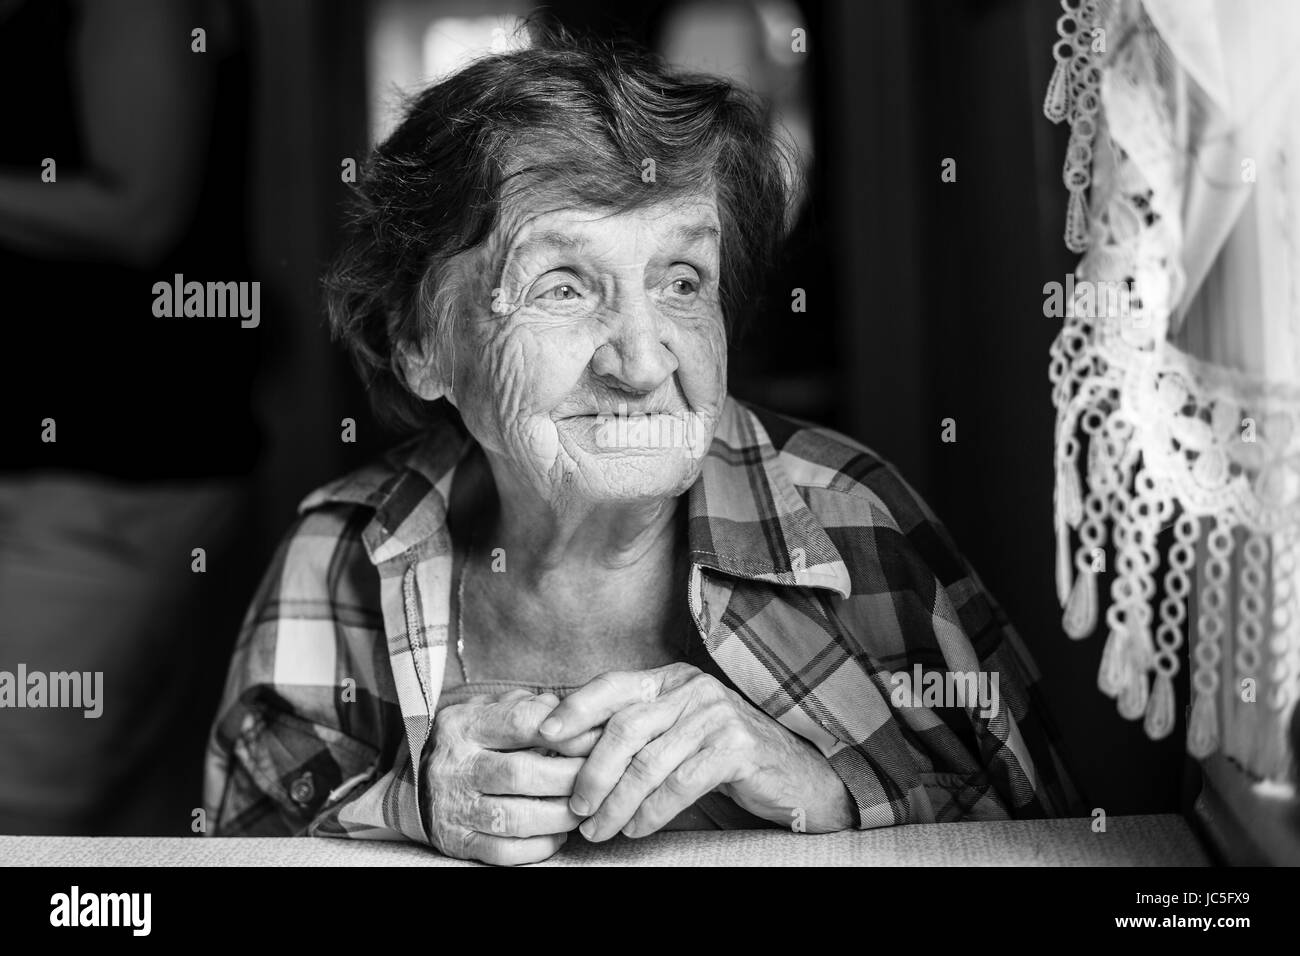 Chinese granny Black and White Stock Photos & Images - Alamy